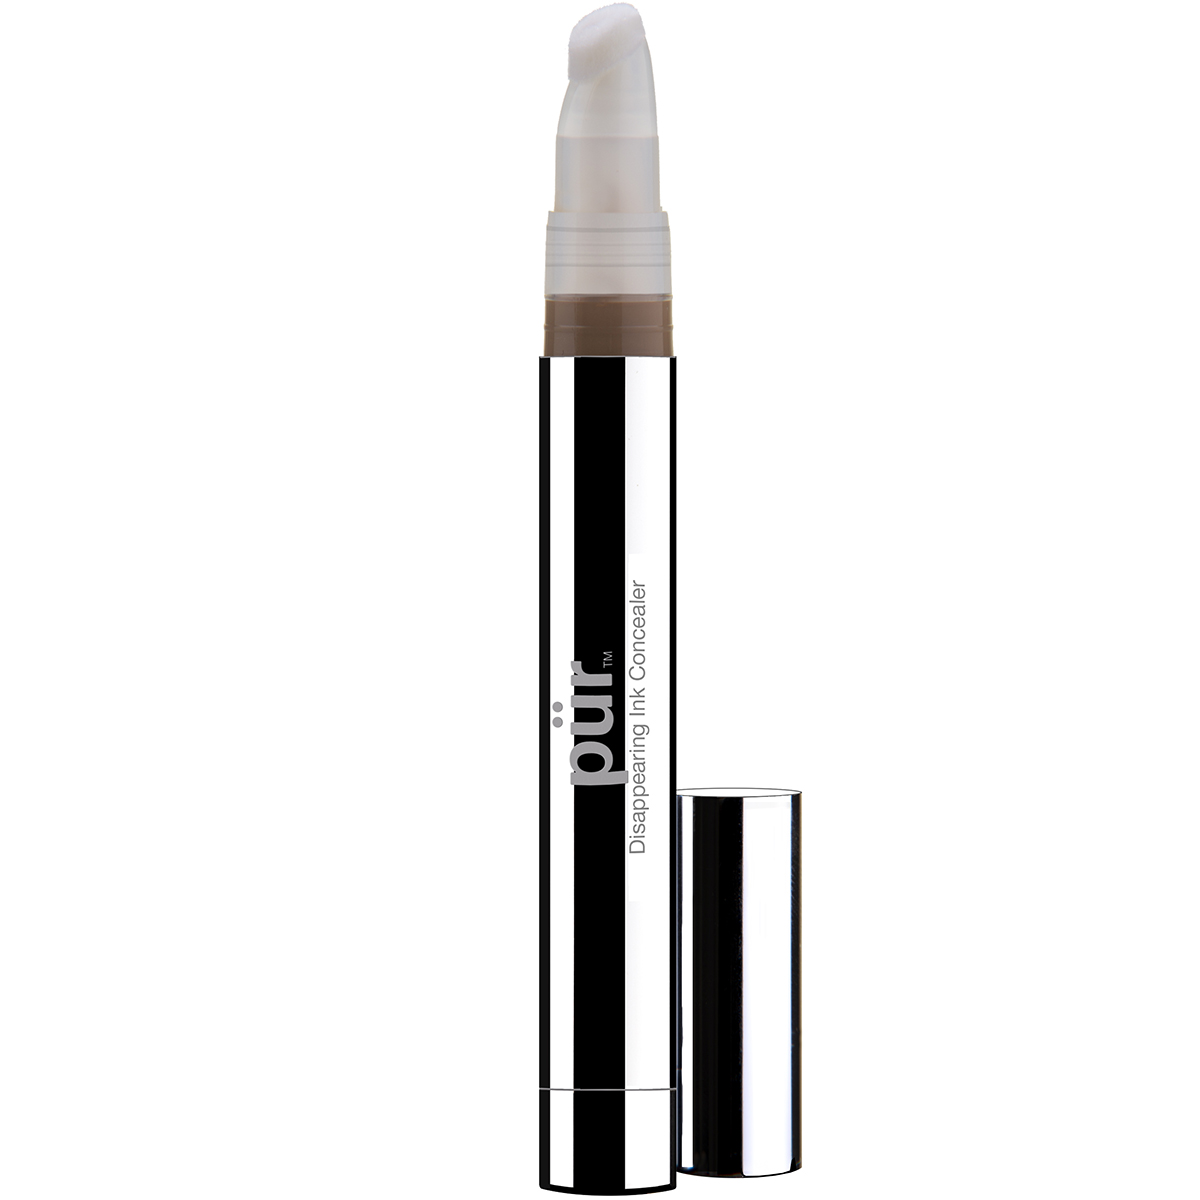 Pur Disappearing Ink Concealer